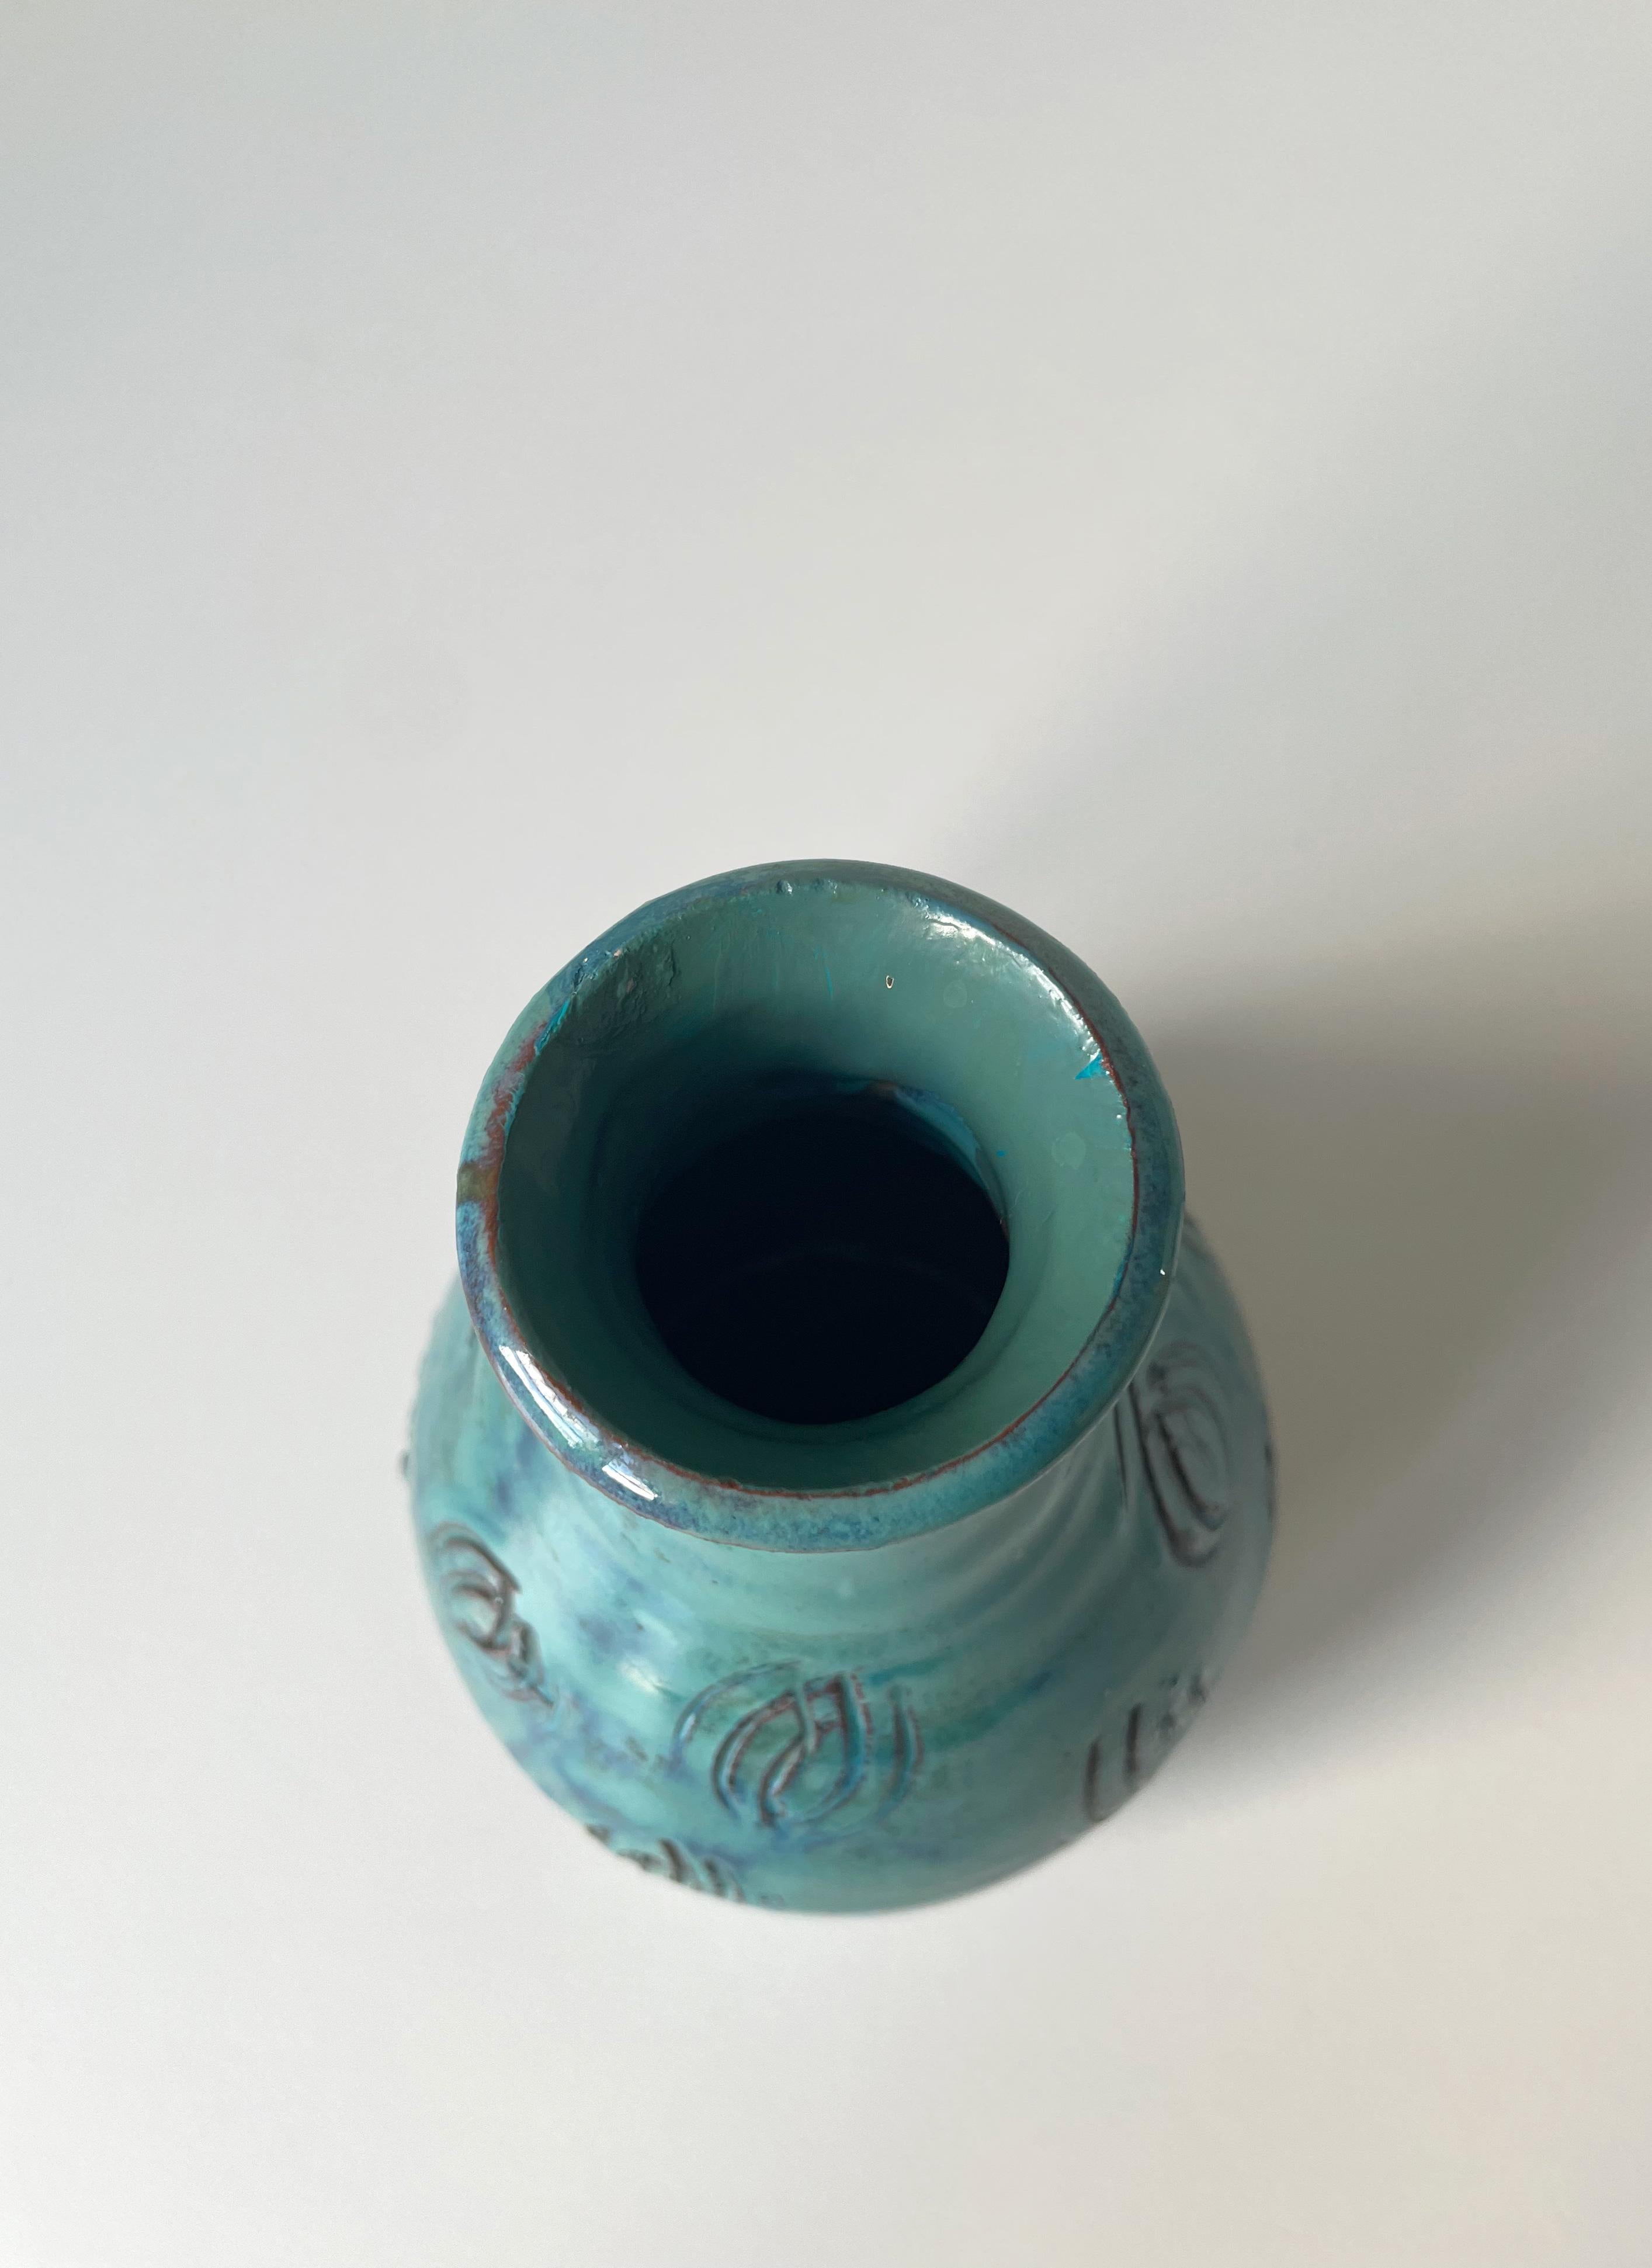 Hand-Crafted Vintage Handmade Turquoise Ceramic Vase with Organic Decor, 1960s